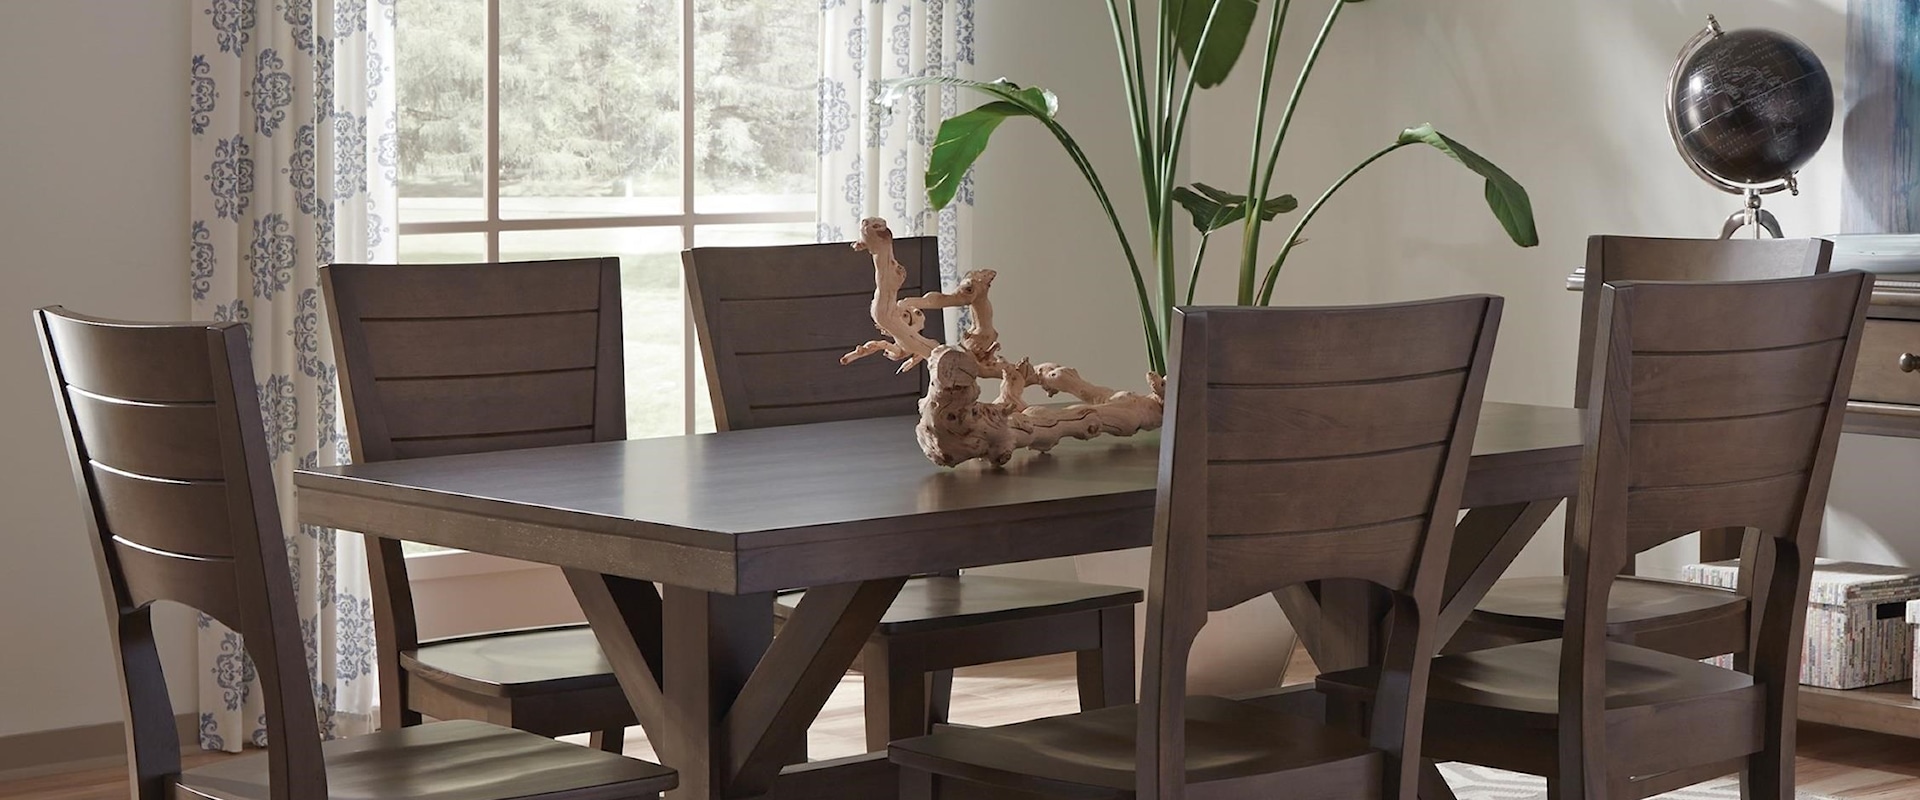 Mission Dining Table and Chair Set with Trestle Table